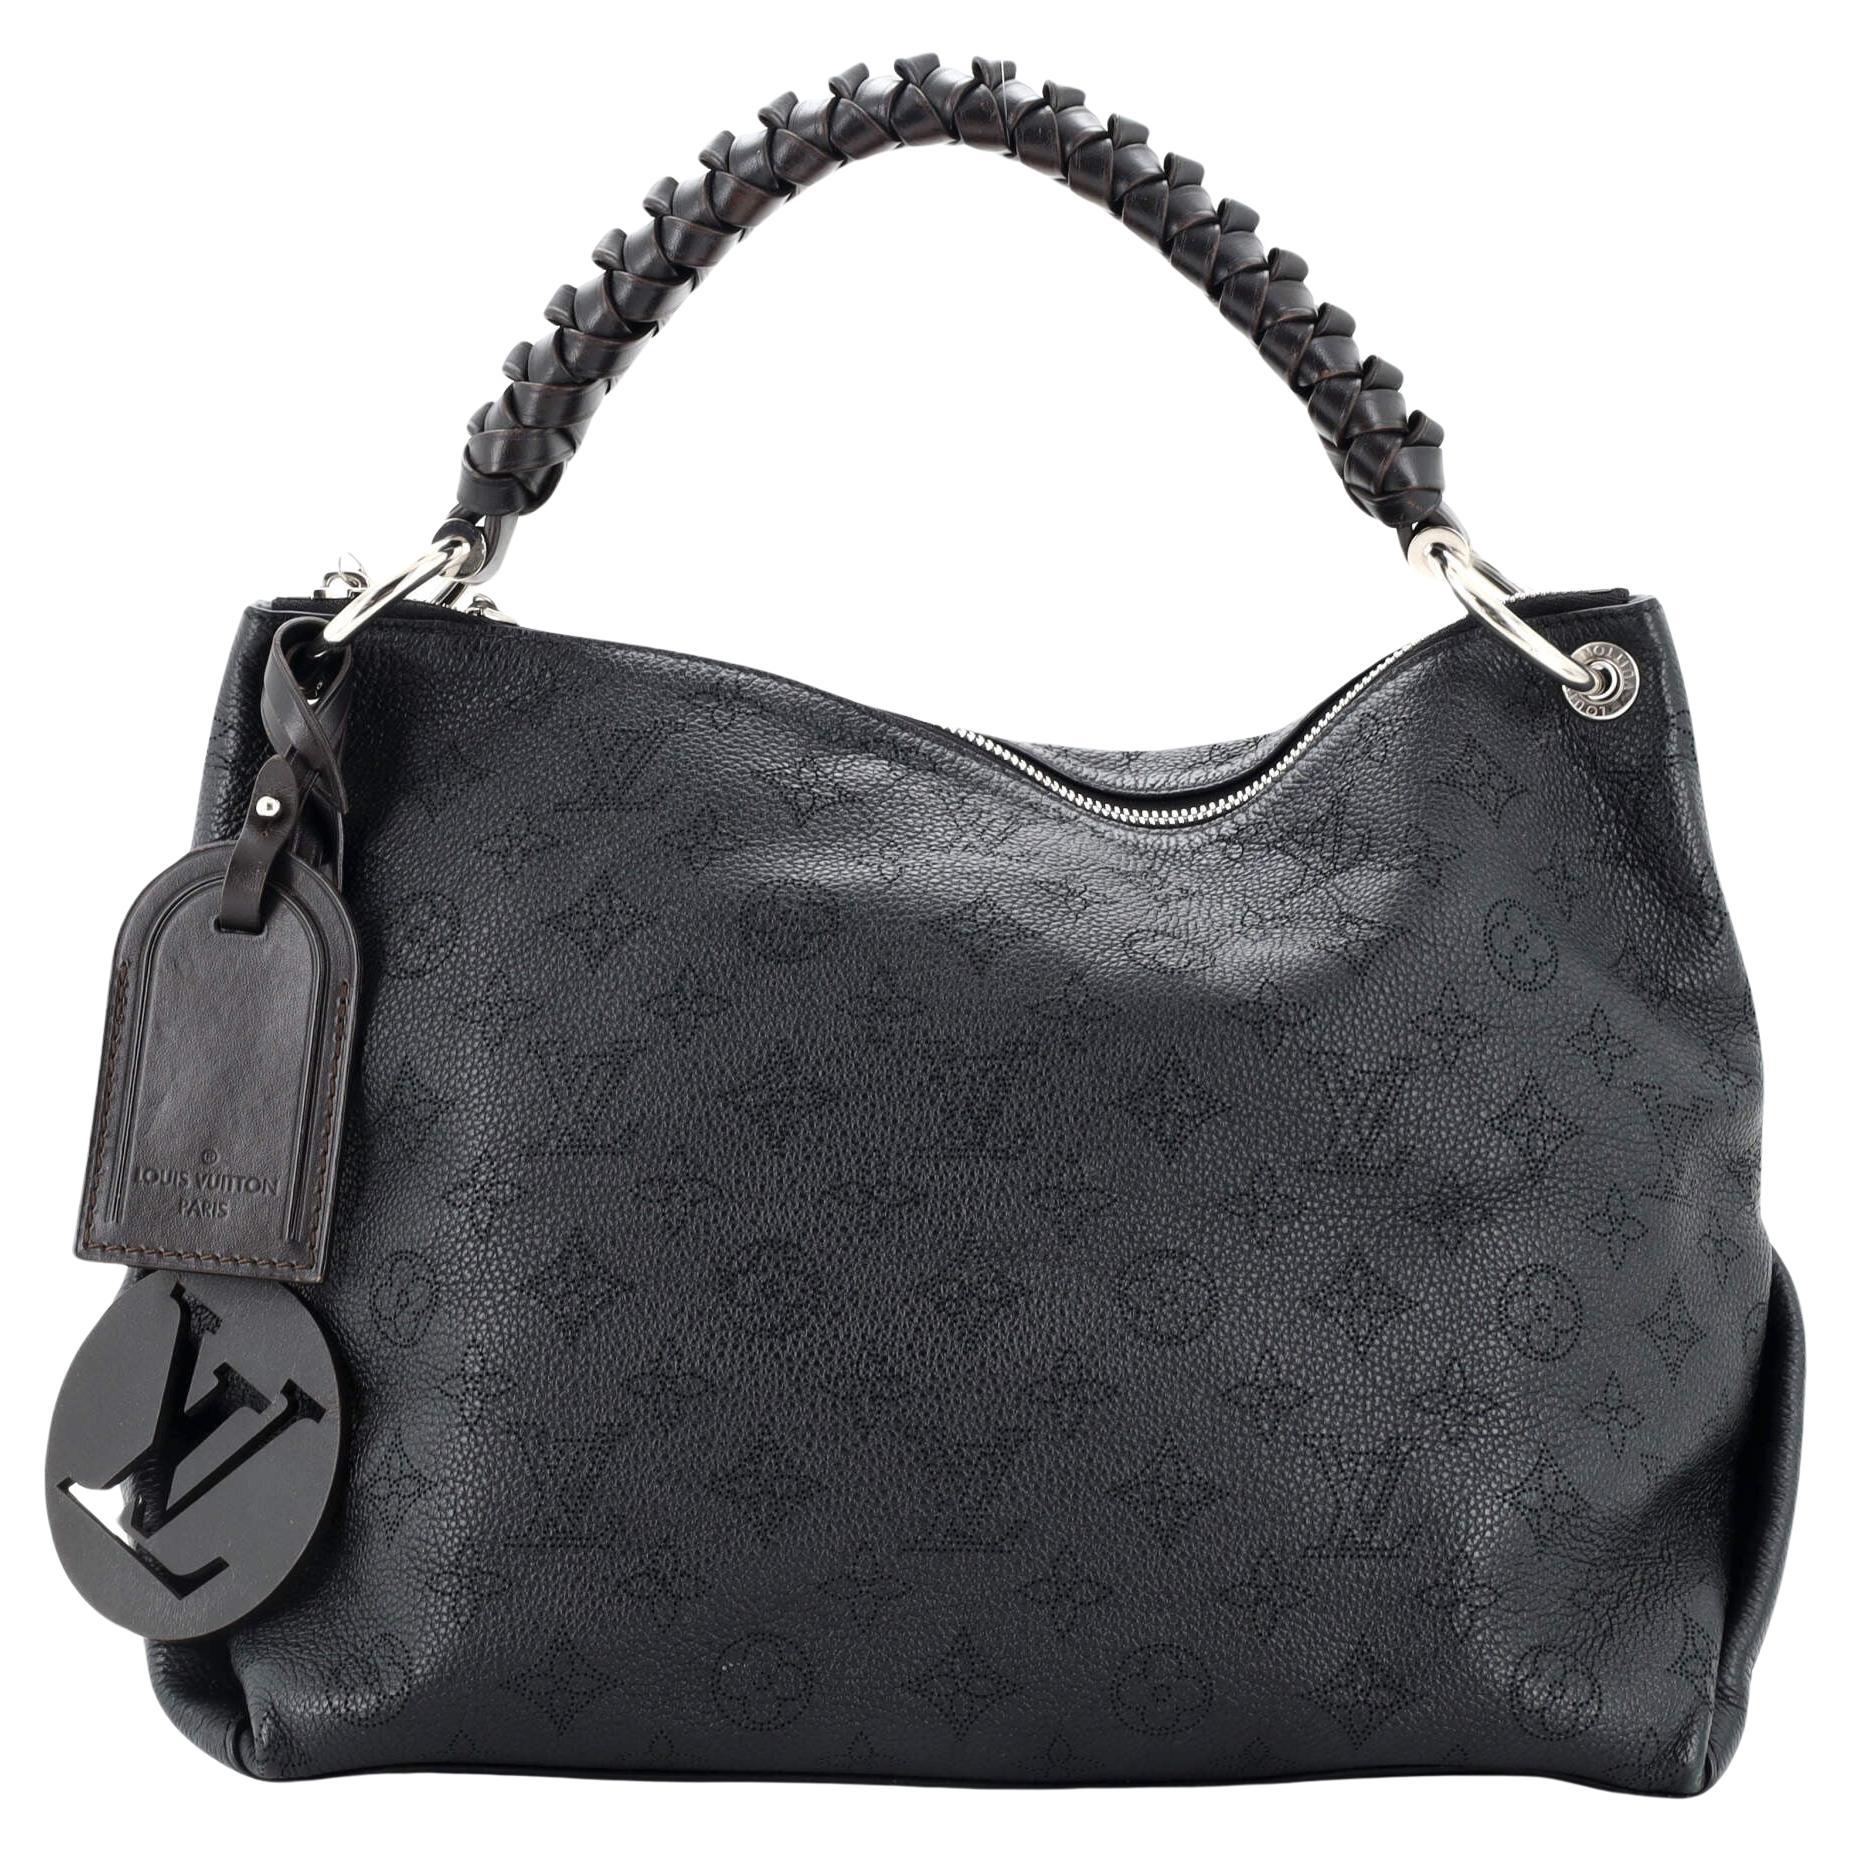 Braided Handle for LV Beaubourg Hobo Top Handle Neonoe Strap Pouch